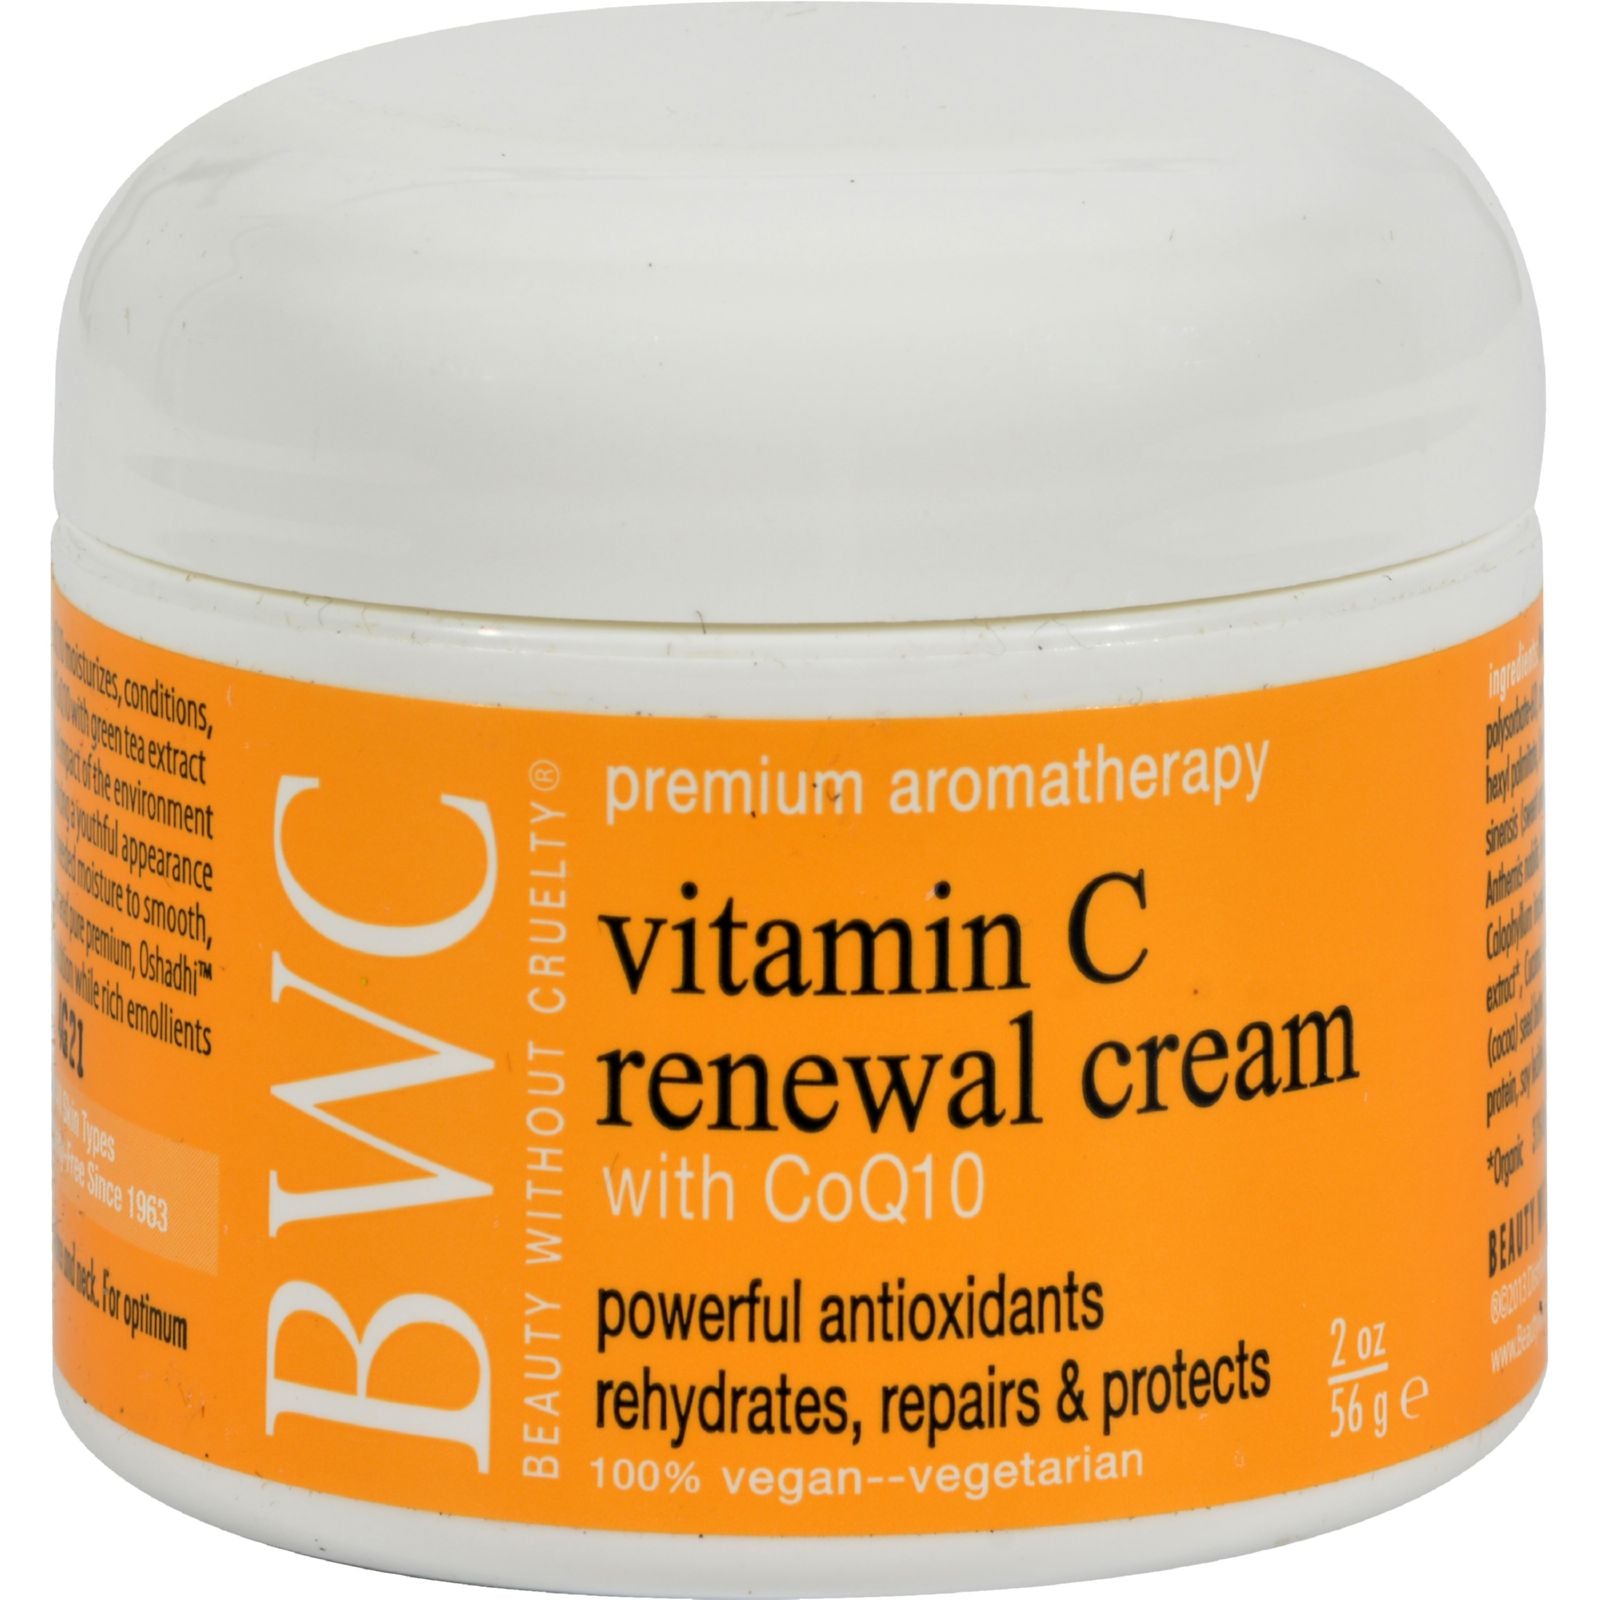 Beauty Without Cruelty Renewal Cream Vitamin C With Coq10 - 2 Oz